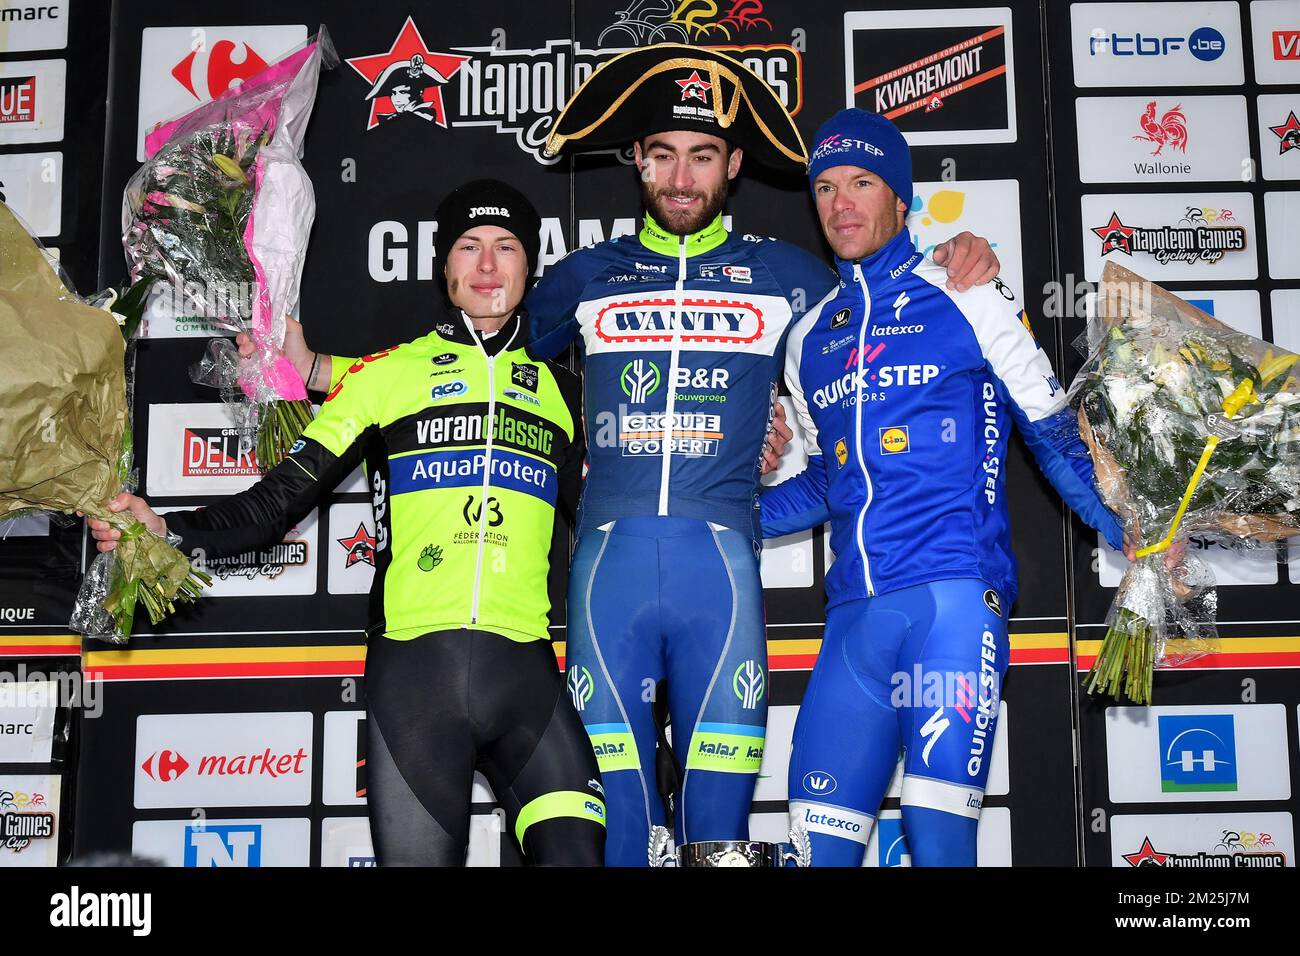 L-R, second, Luxembourgian Alex Kirsch of WB Veranclassic Aqua Protect, winner Belgian Guillaume Van Keirsbulck of Wanty-Groupe Gobert and third, Belgian Iljo Keisse of Quick-Step Floors celebrate on the podium after the 49th edition of the Grand Prix du Samyn cycling race, Wednesday 01 March 2017. The race starts in Quaregnon and ends in Dour (202,6km). The Grand Prix du Samyn is also the first round of the Napoleon Games Cup. BELGA PHOTO DAVID STOCKMAN Stock Photo